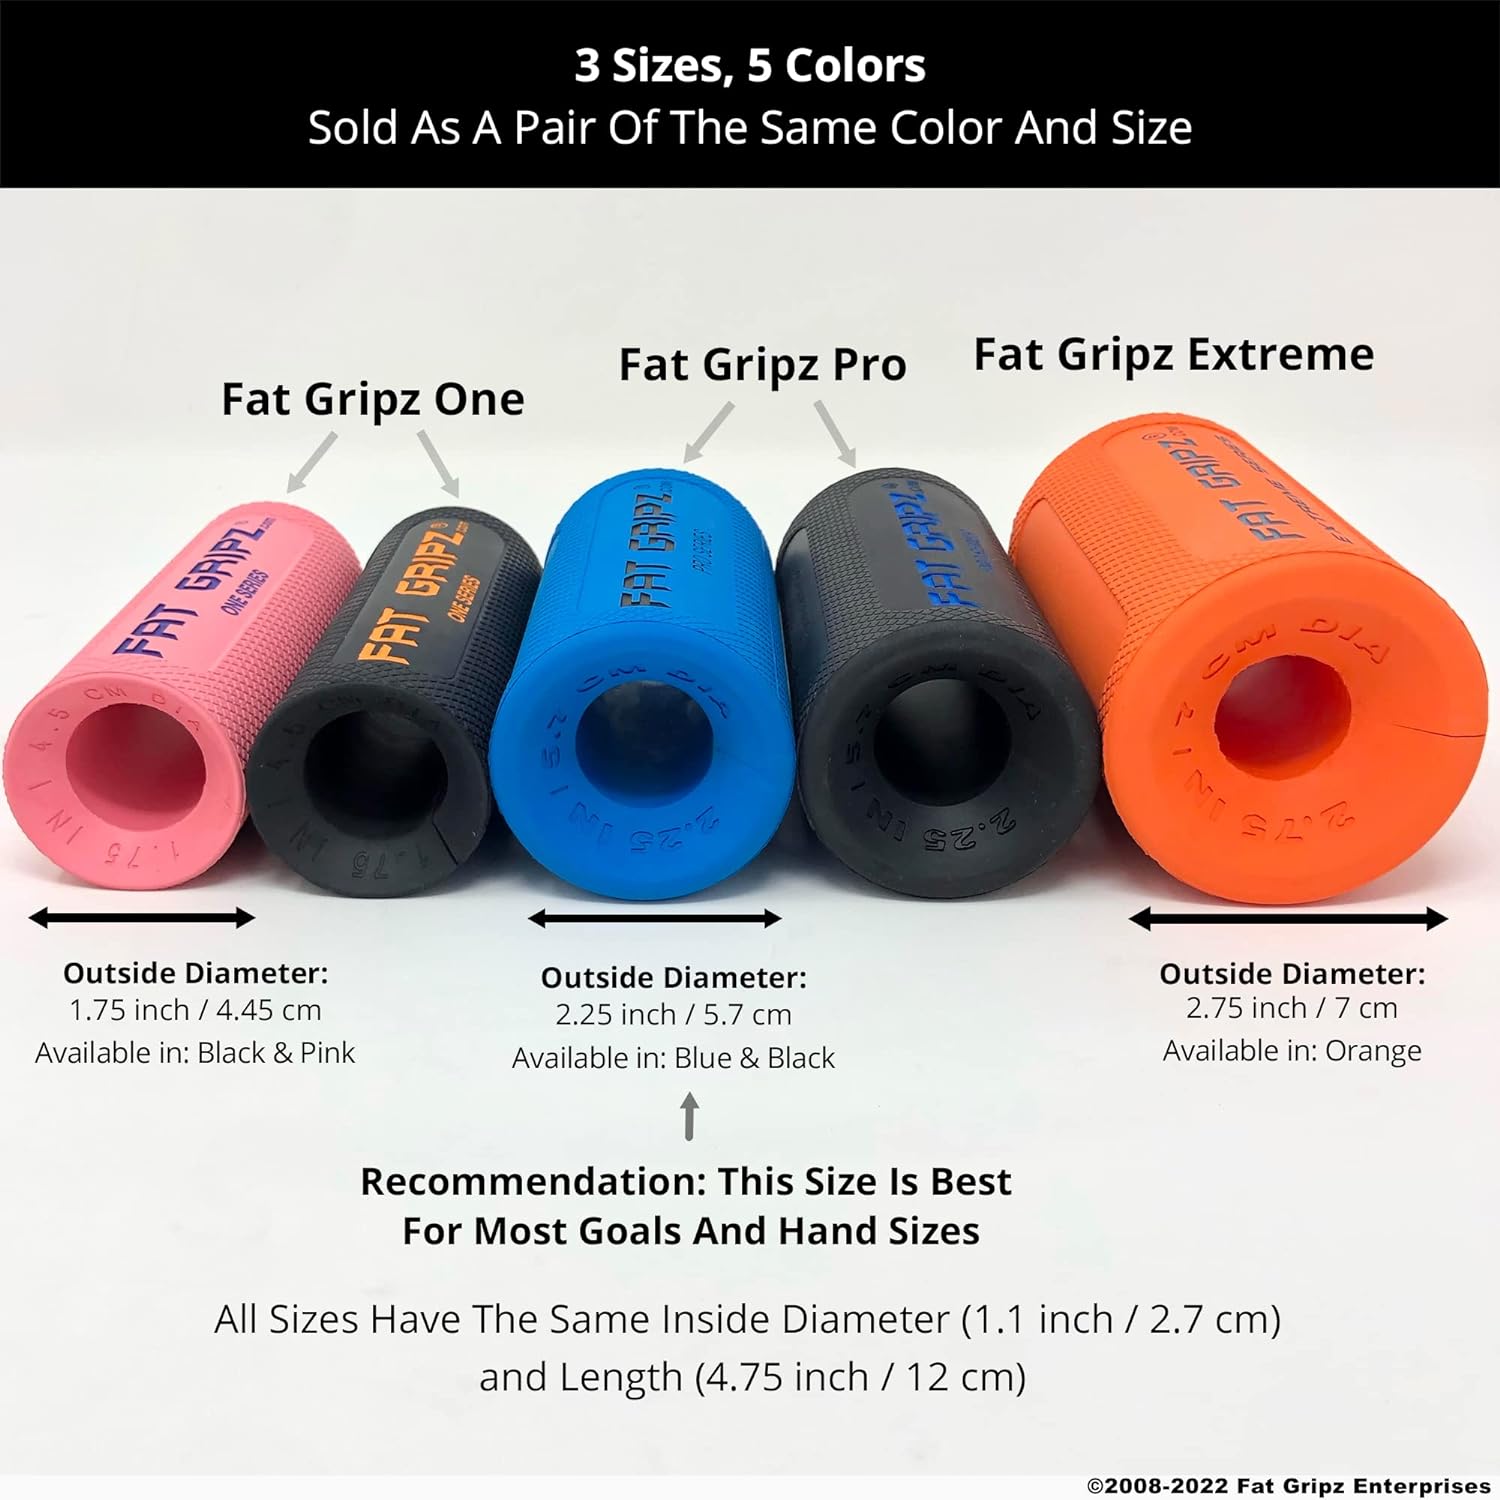 Fat Gripz Pro - The Simple Proven Way to Get Big Biceps  Forearms Fast - at Home Or in The Gym (Winner of 3 Men’s Health Magazine Awards) (2.25” Outer Diameter)